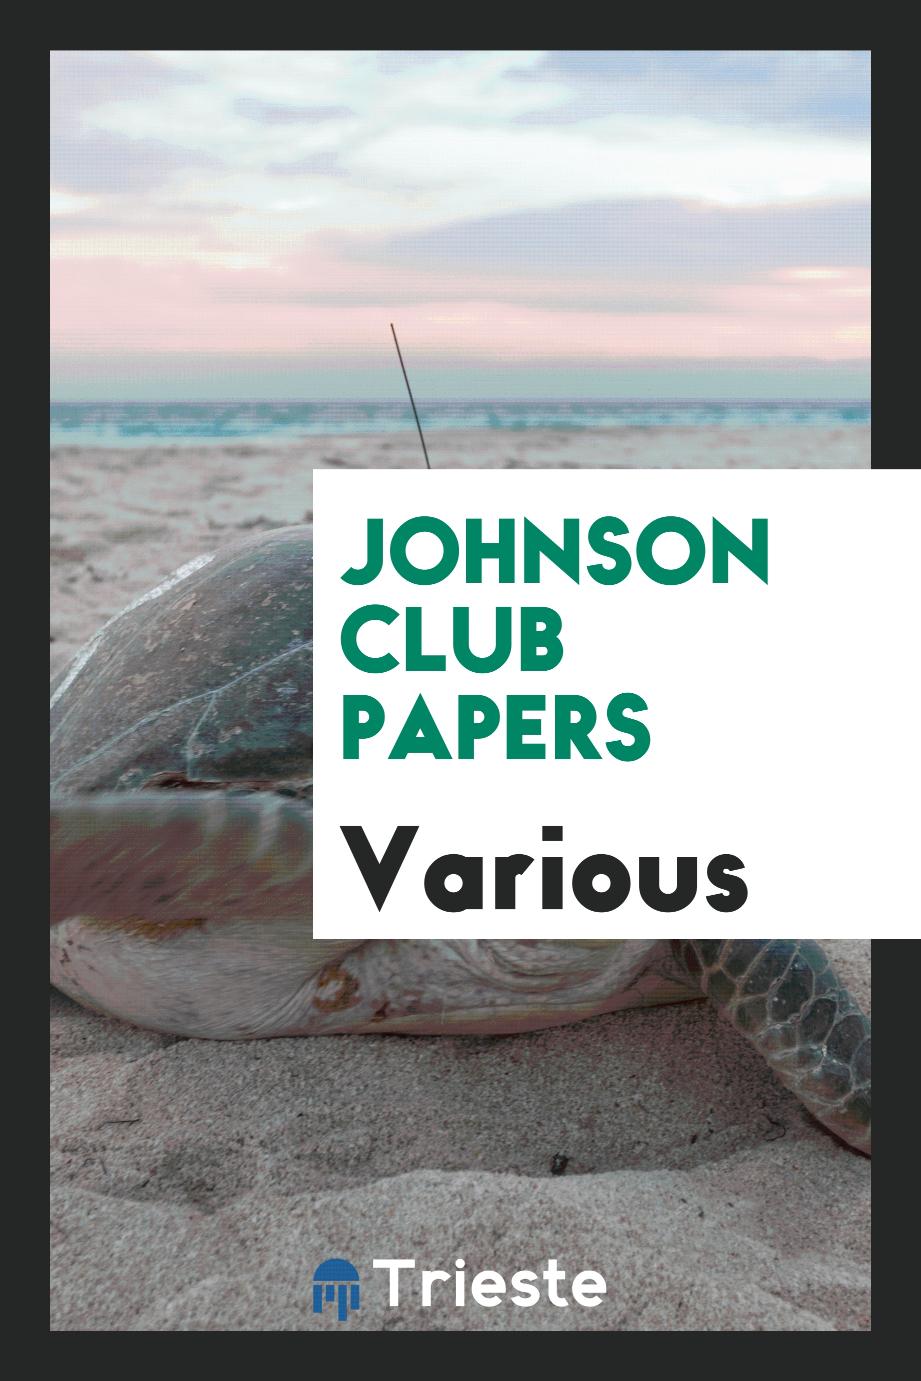 Johnson club papers